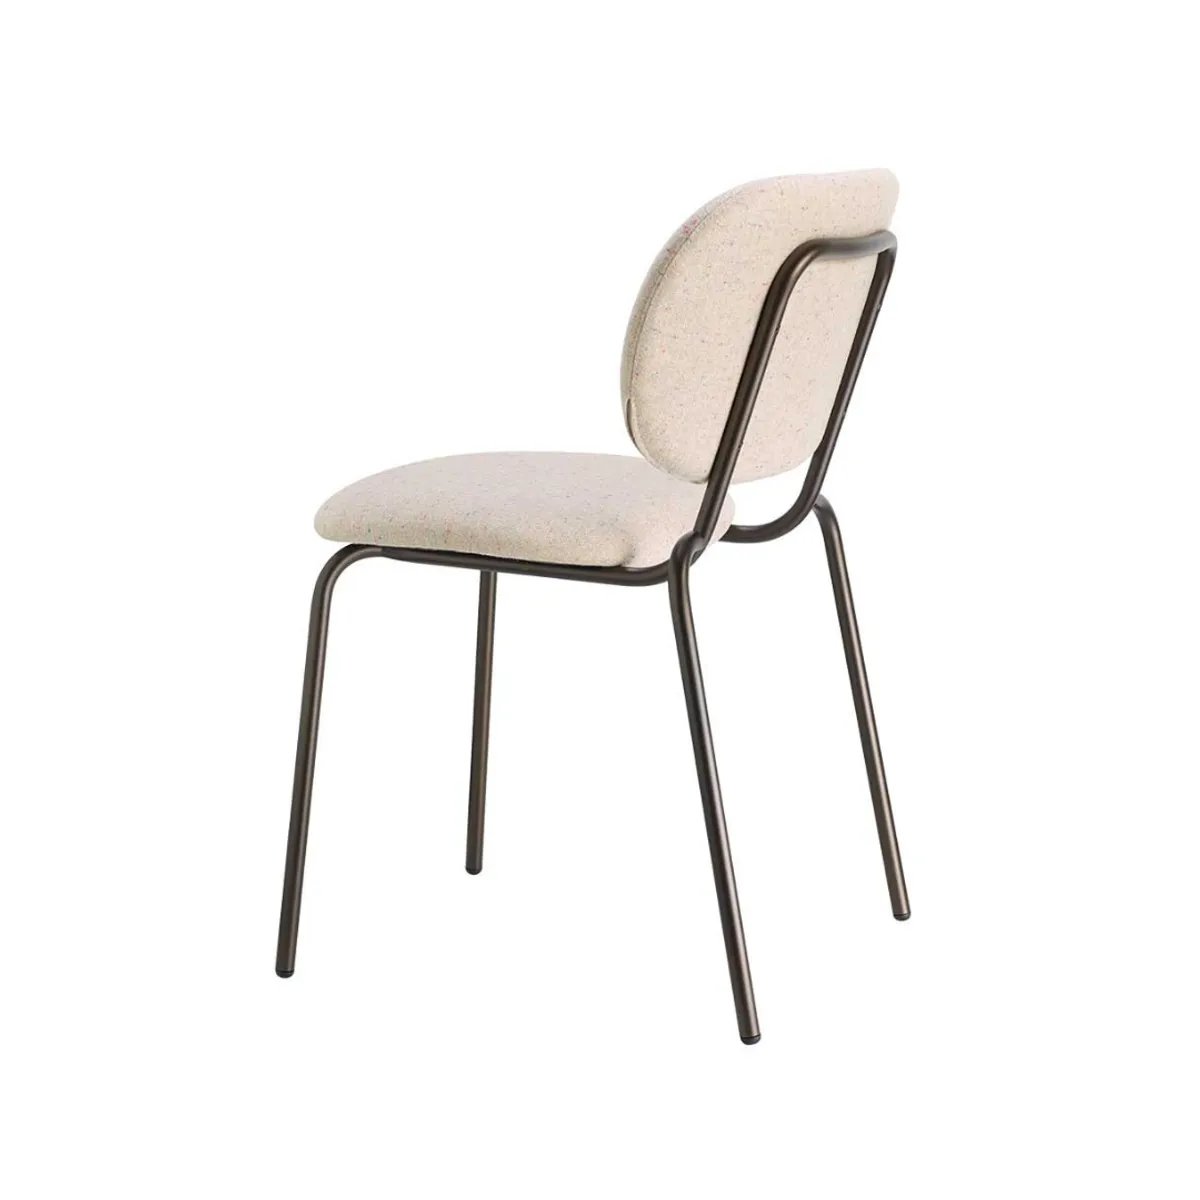 Layla soft side chair 7